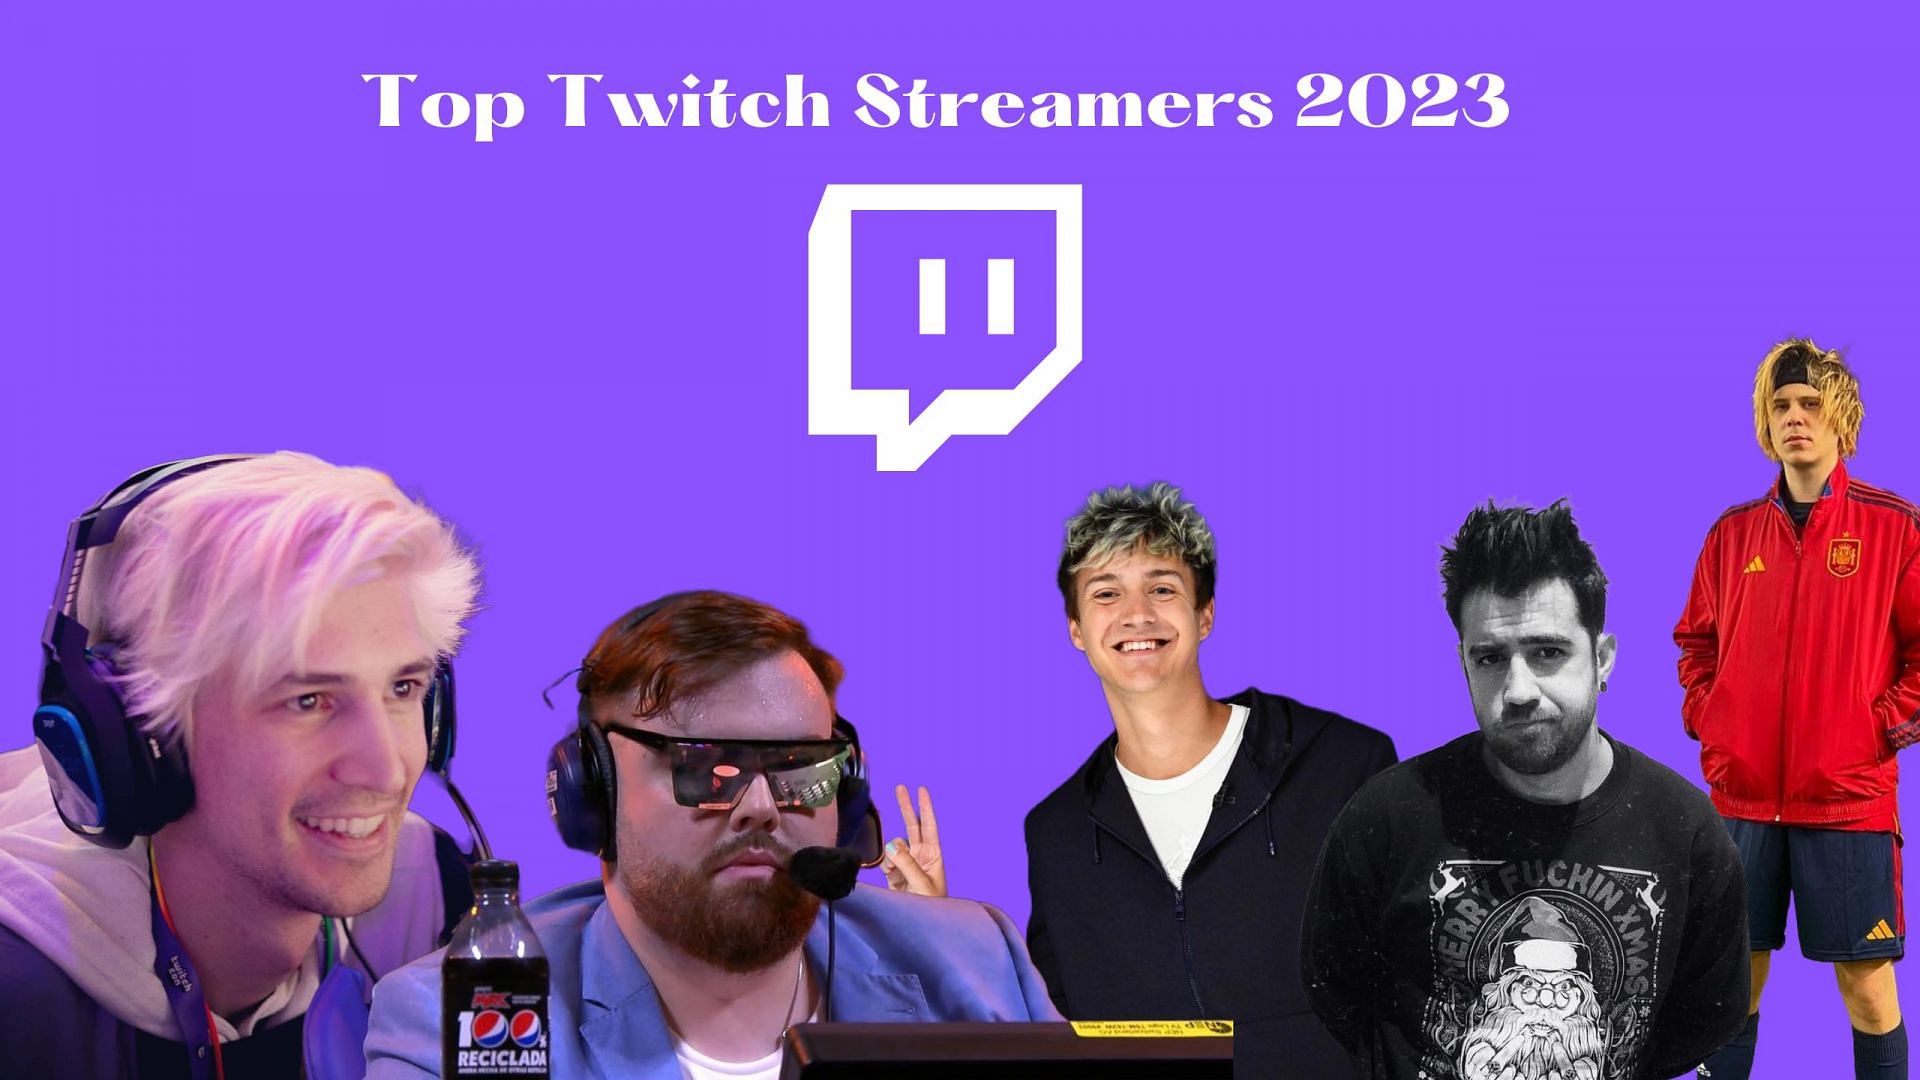 Most followed Twitch Streamers in 2023